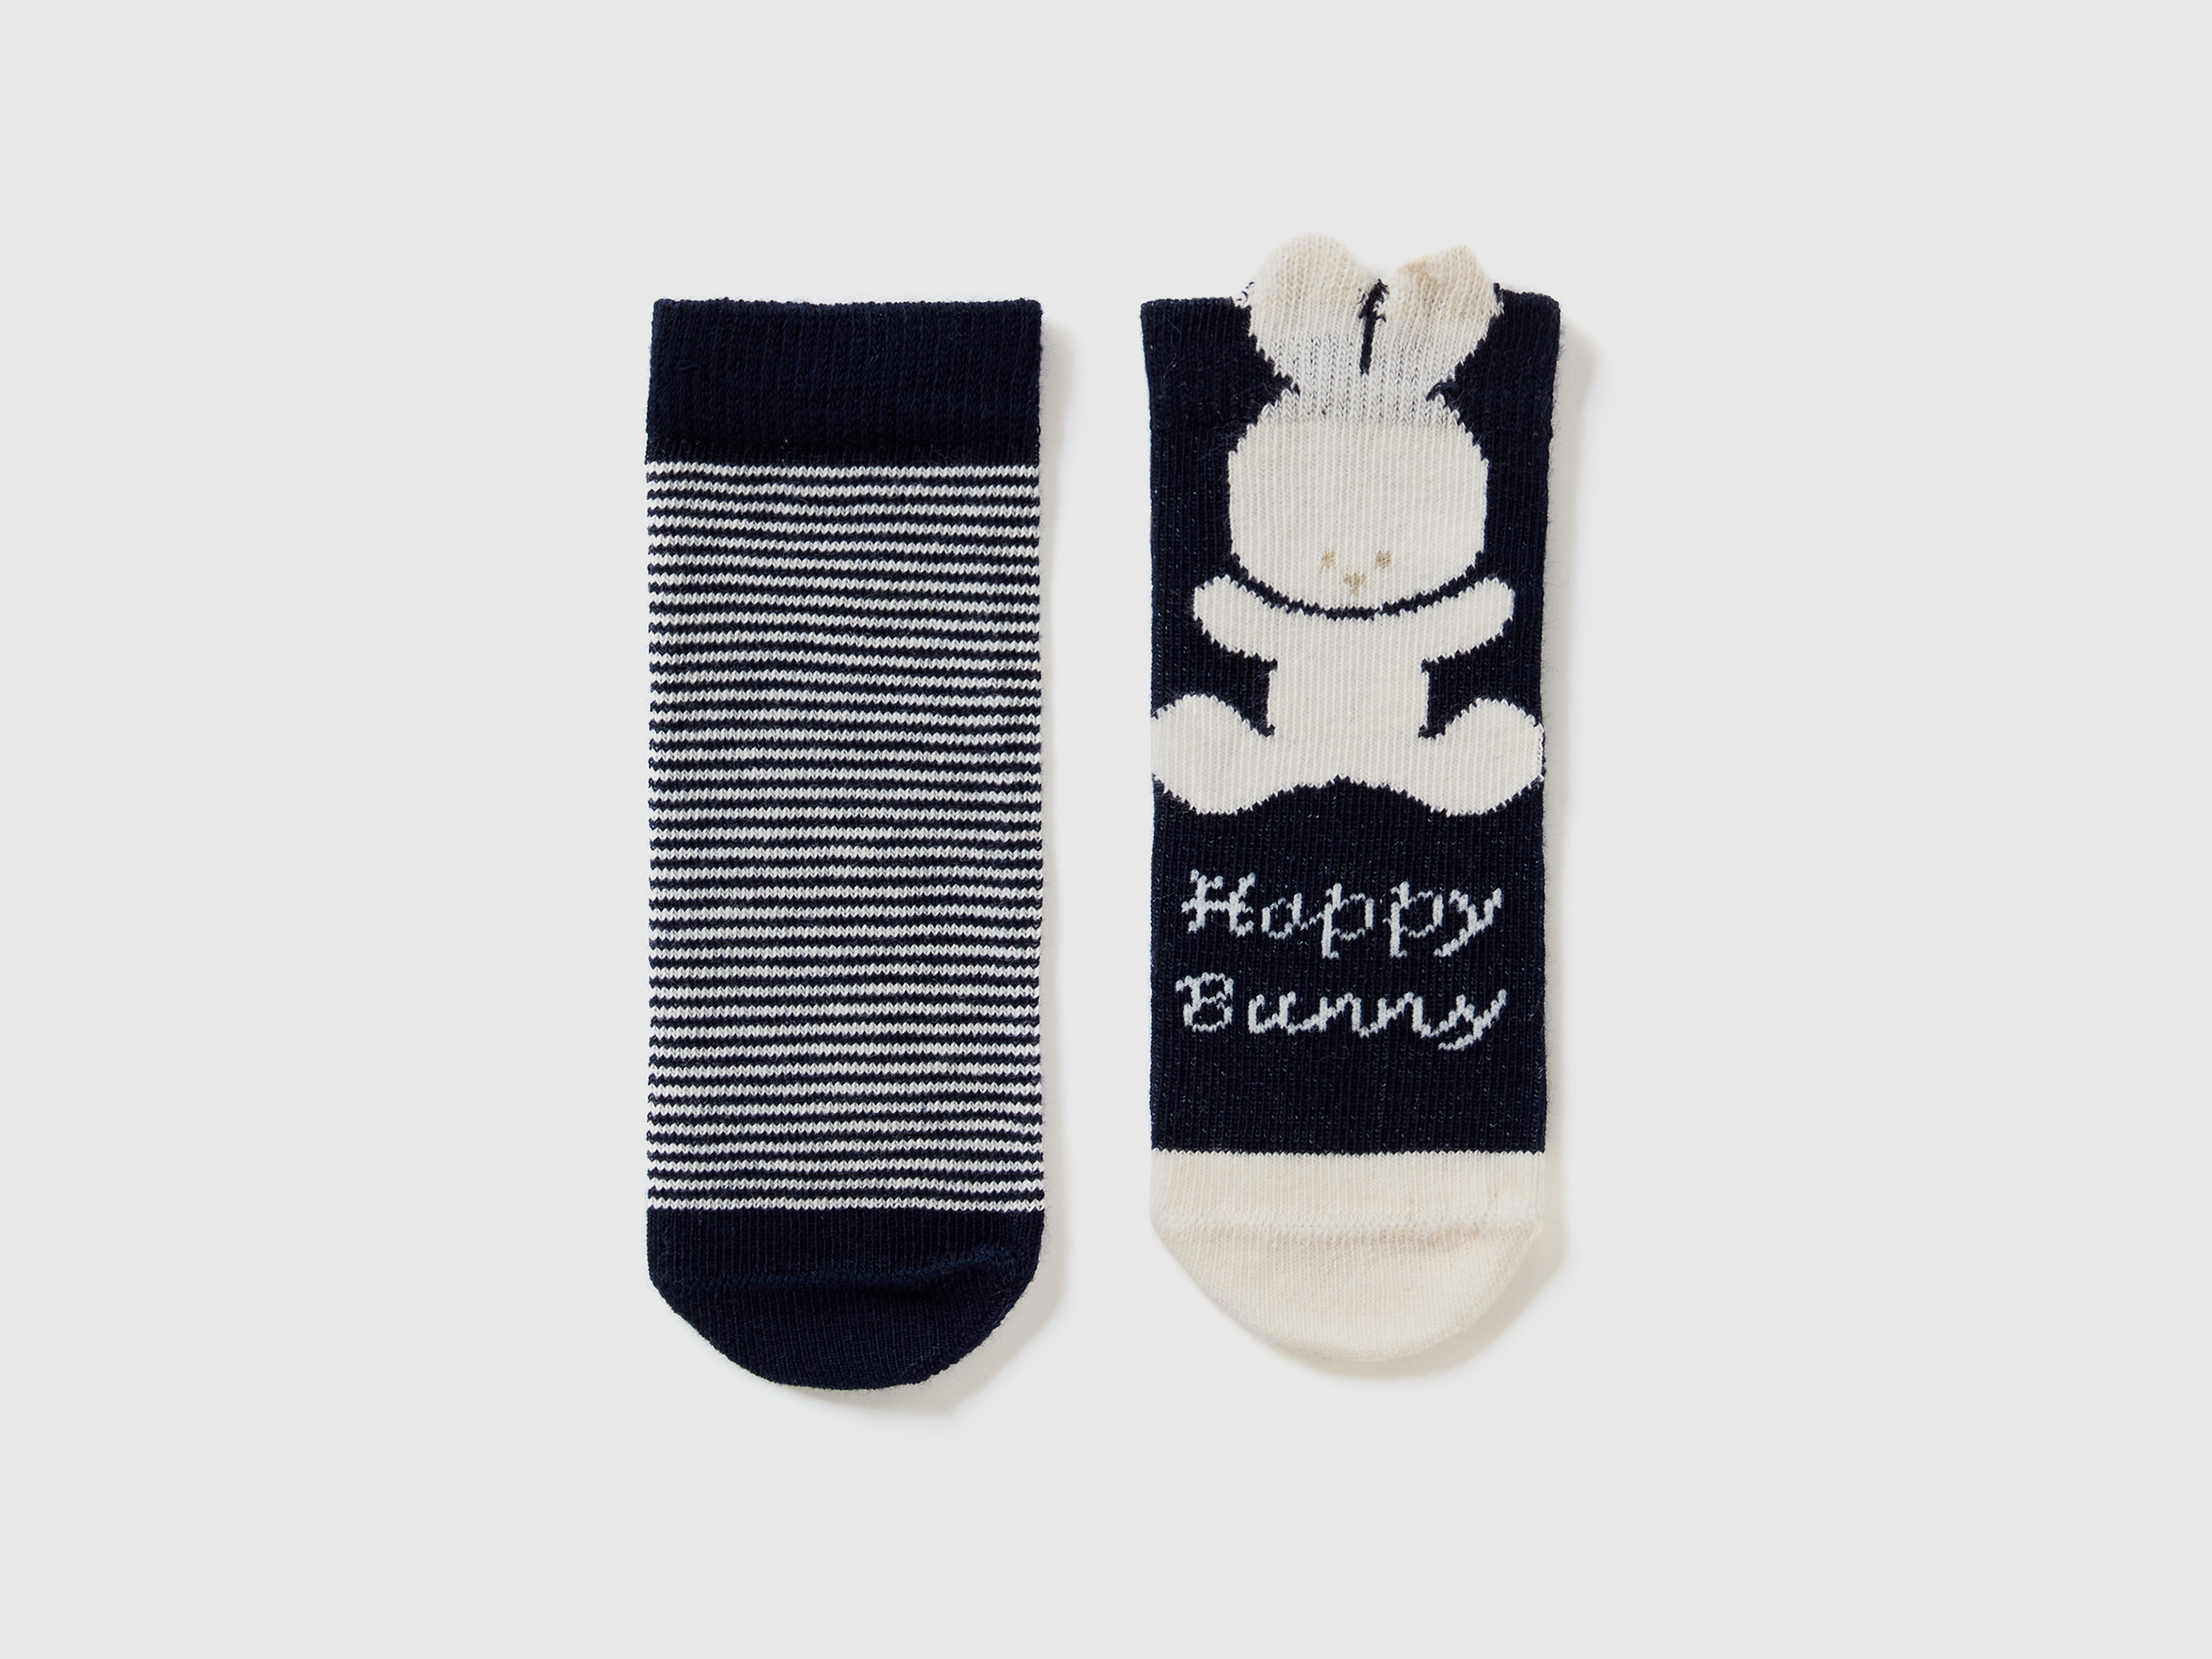 Benetton, Sock Set With Stripes And Bunny, size 6-12, Dark Blue, Kids